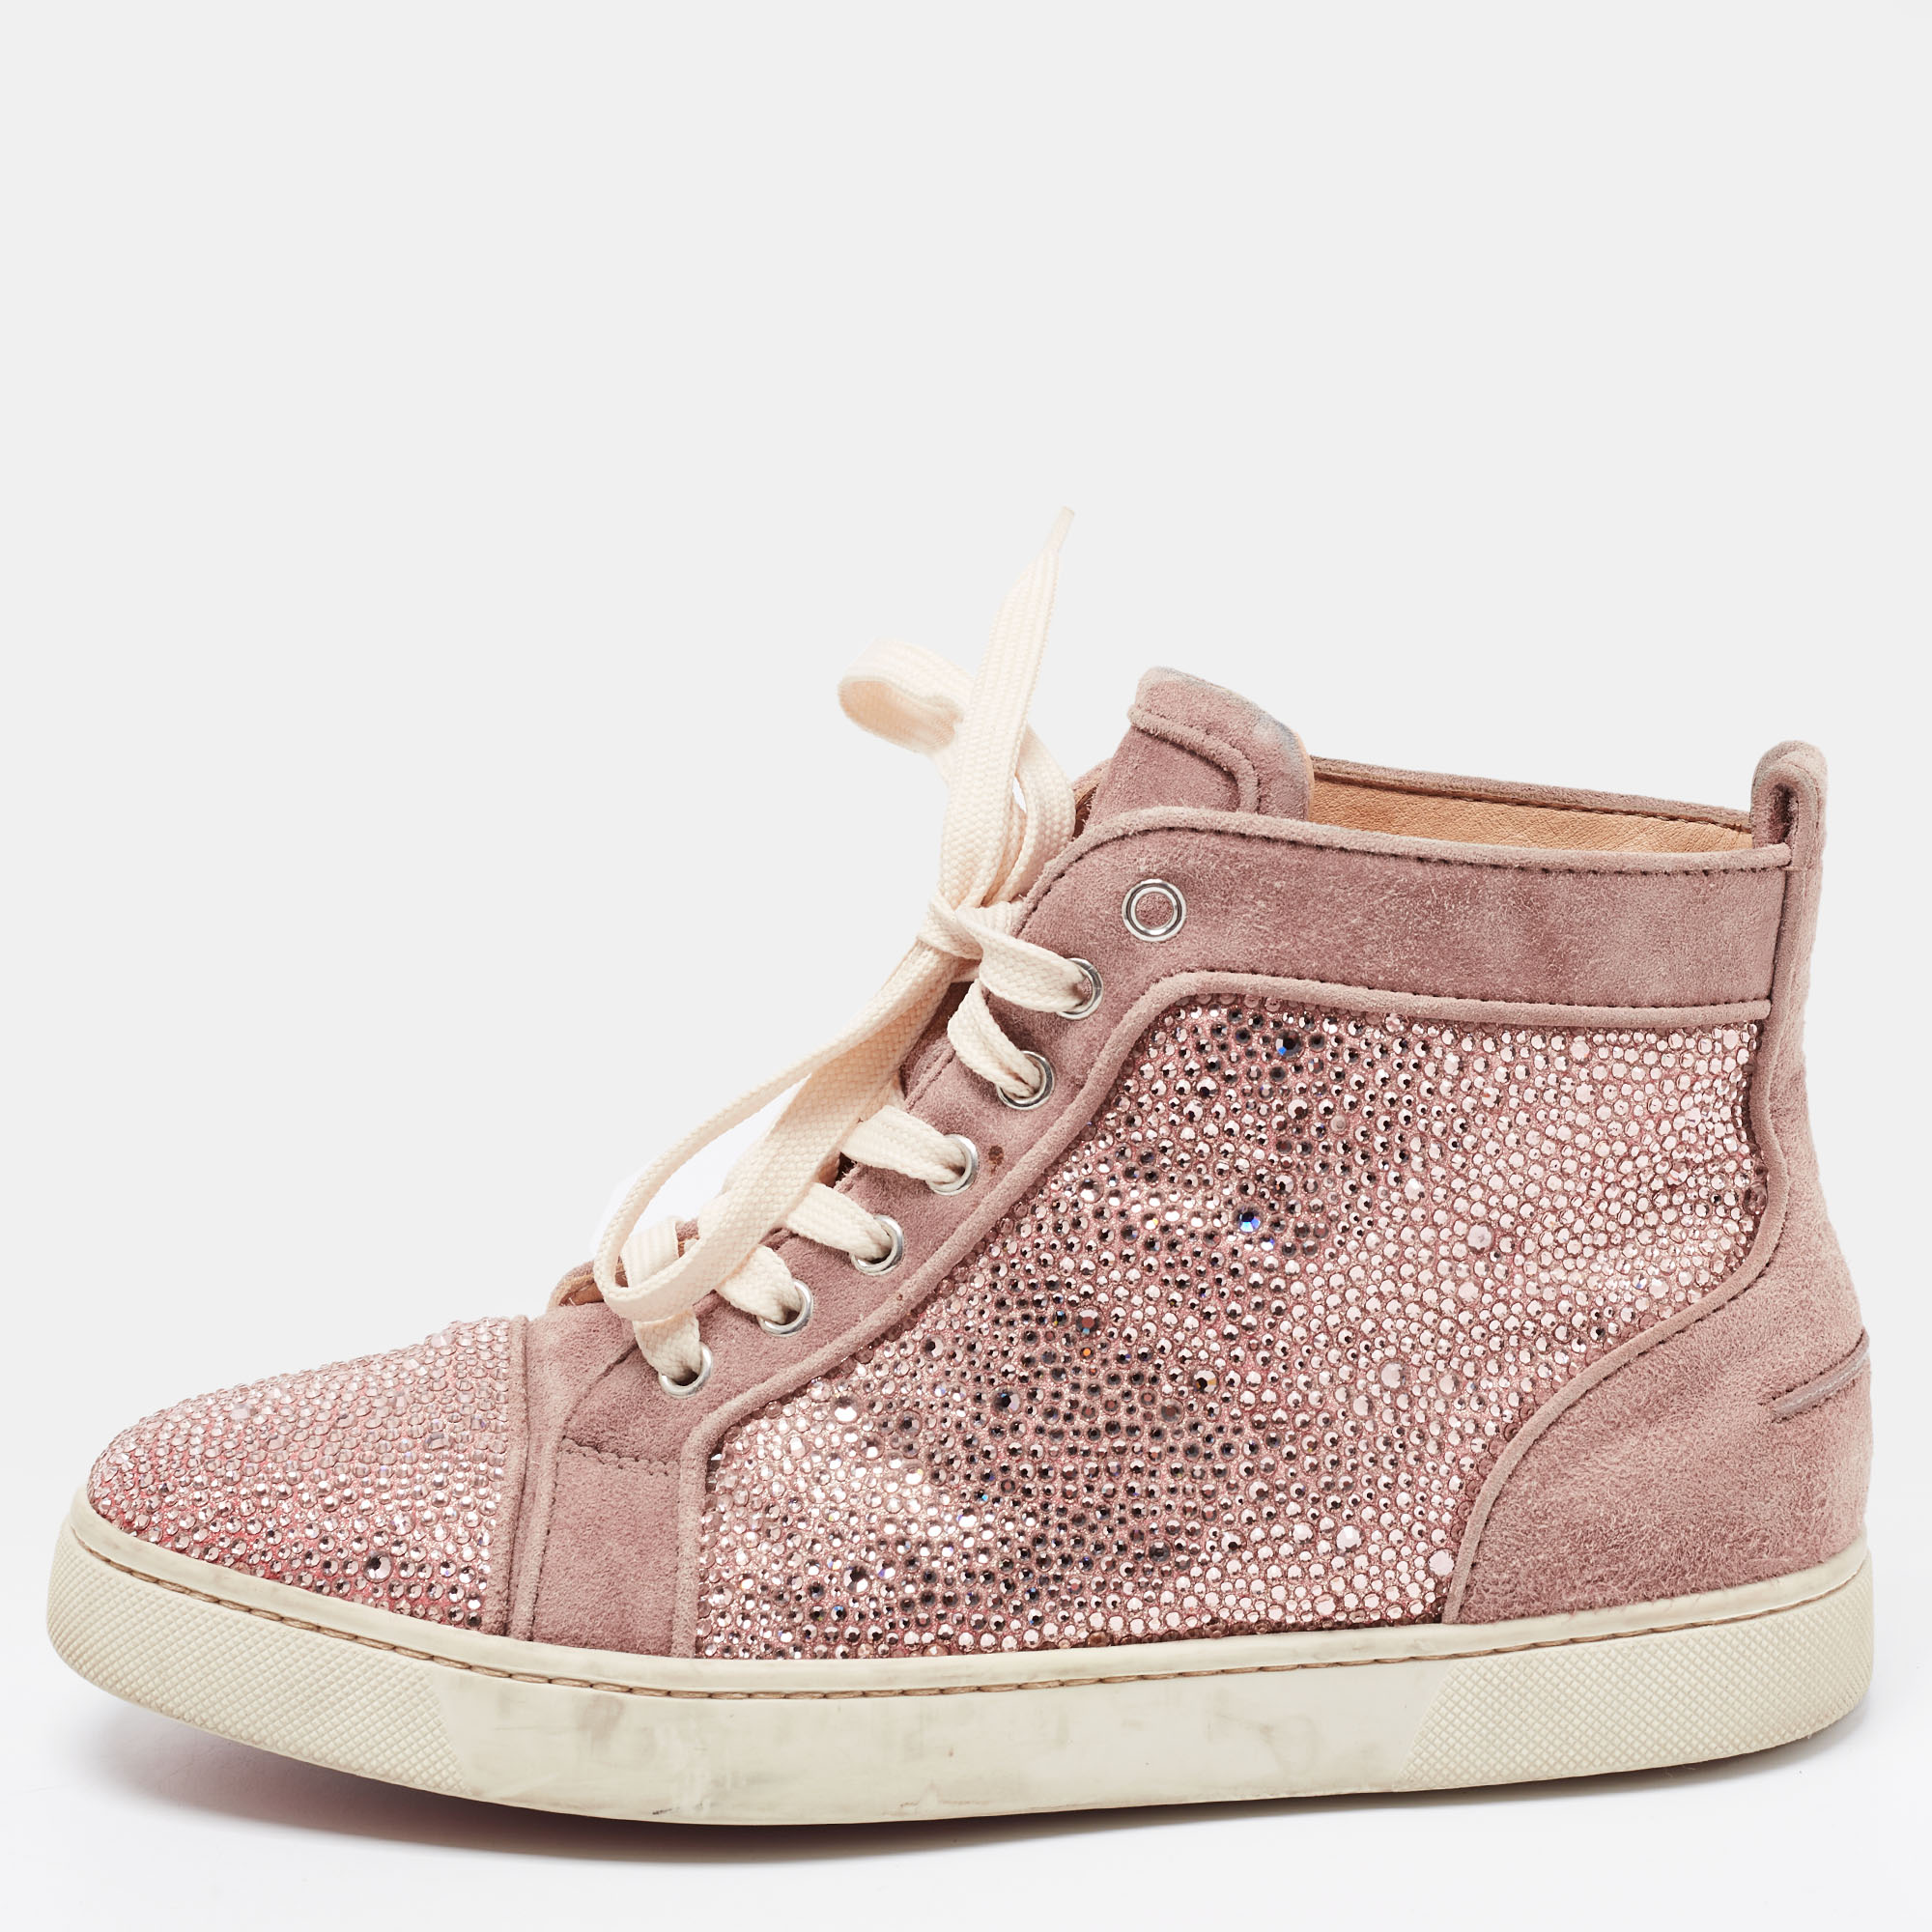 To bless your feet with comfort and style Christian Louboutin brings you these beautiful high top sneakers. The pretty pink embellished sneakers are made from suede with leather insoles. The tongue pads lace ups and durable rubber soles complete the snug yet chic look.